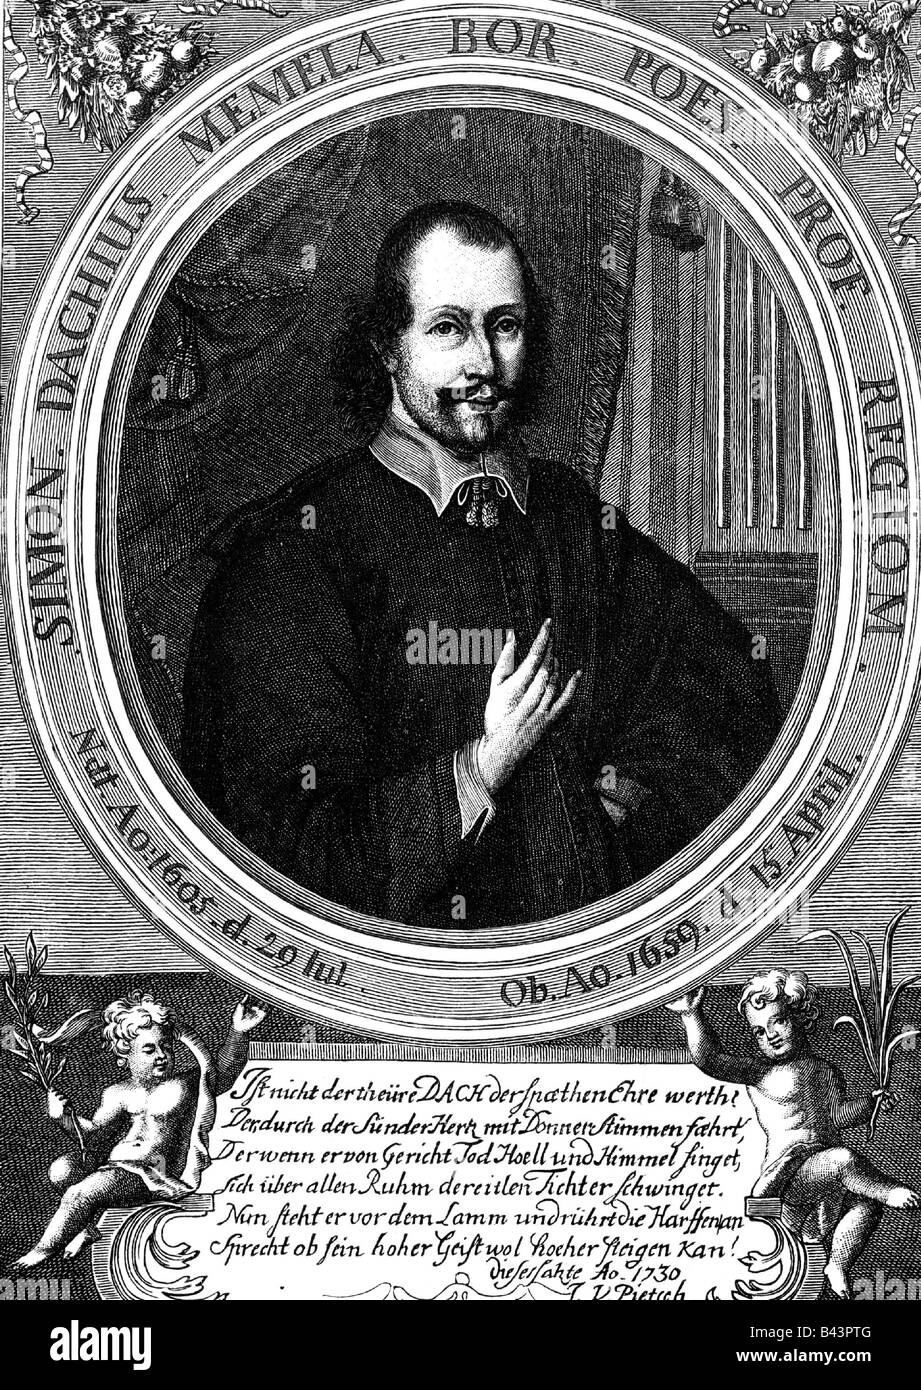 Dach, Simon, 29.7.1605 - 15.4.1659, German lyrical poet, copper engraving, by Wolfgang Philipp Kilian, 1730, with poem by Pietsch, Artist's Copyright has not to be cleared Stock Photo